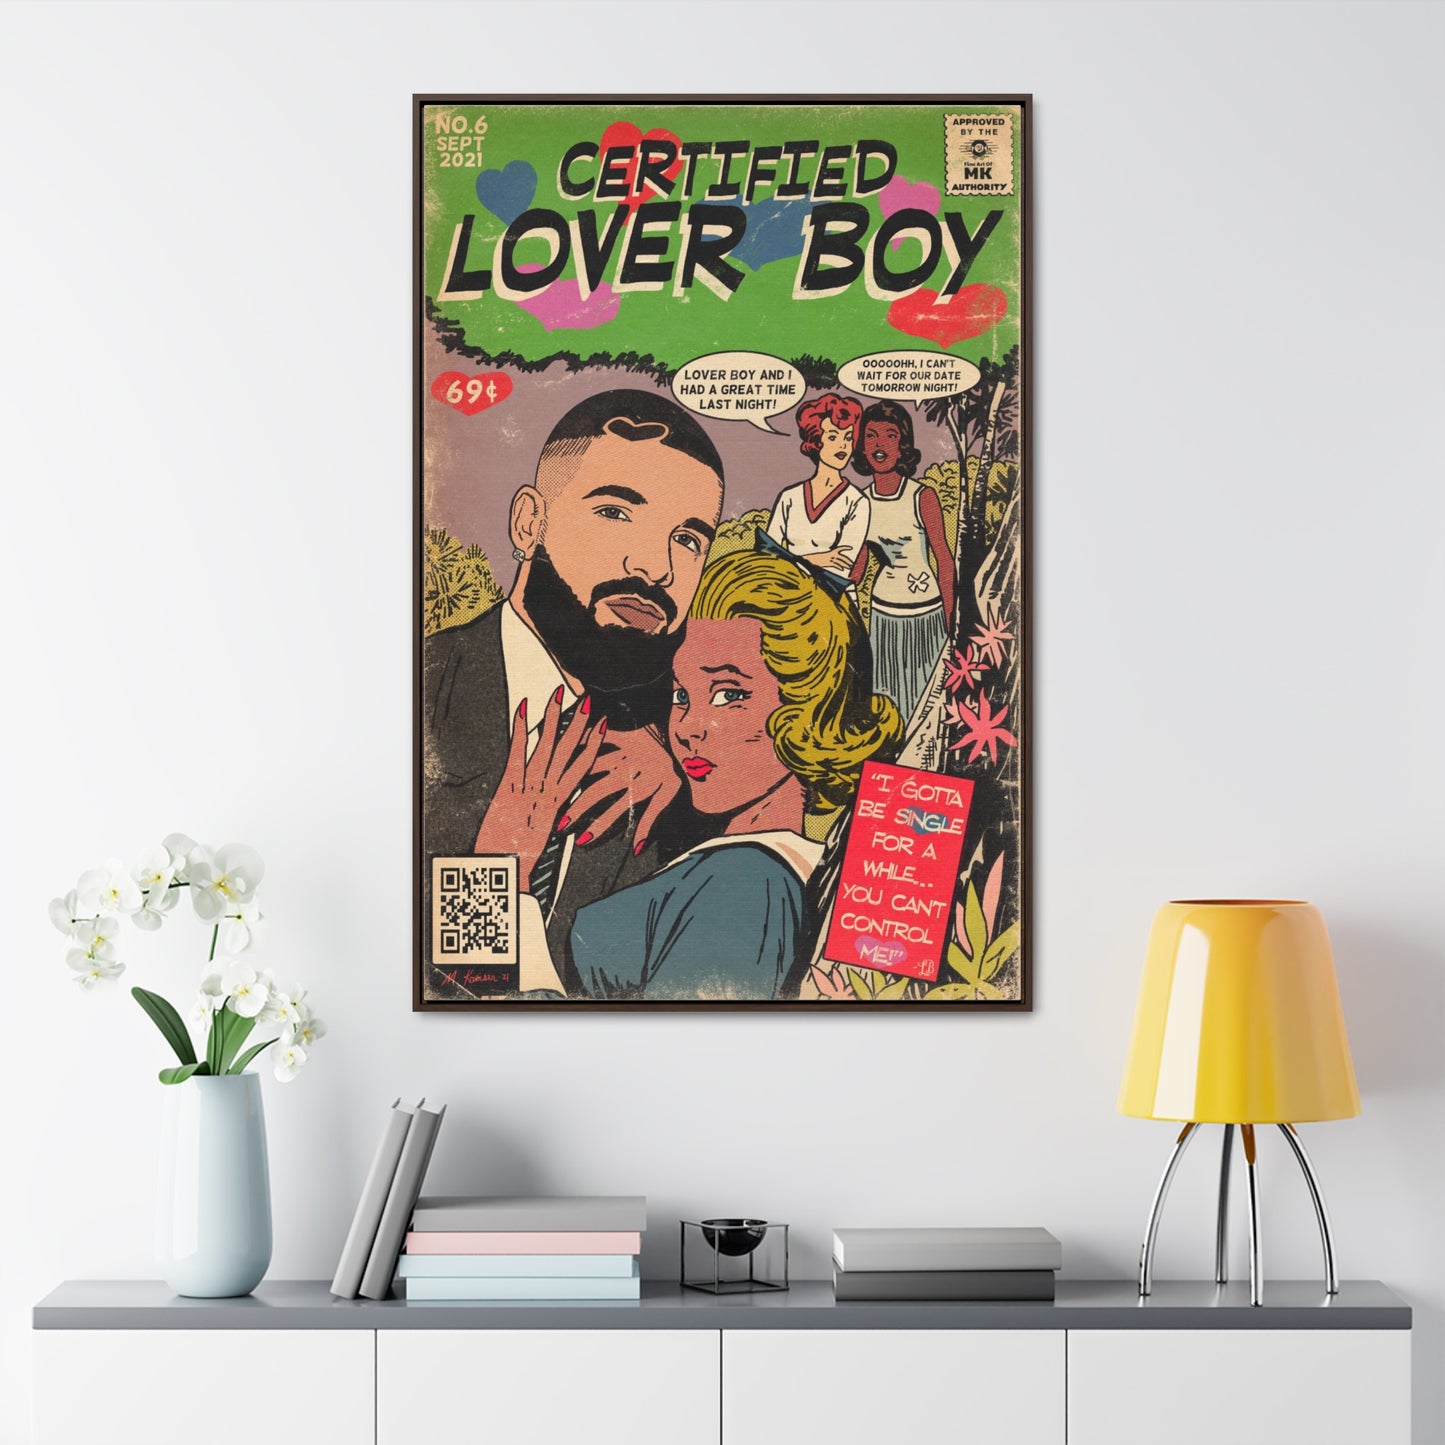 Drake - Certified Lover Boy - Gallery Canvas Wraps, Vertical Frame